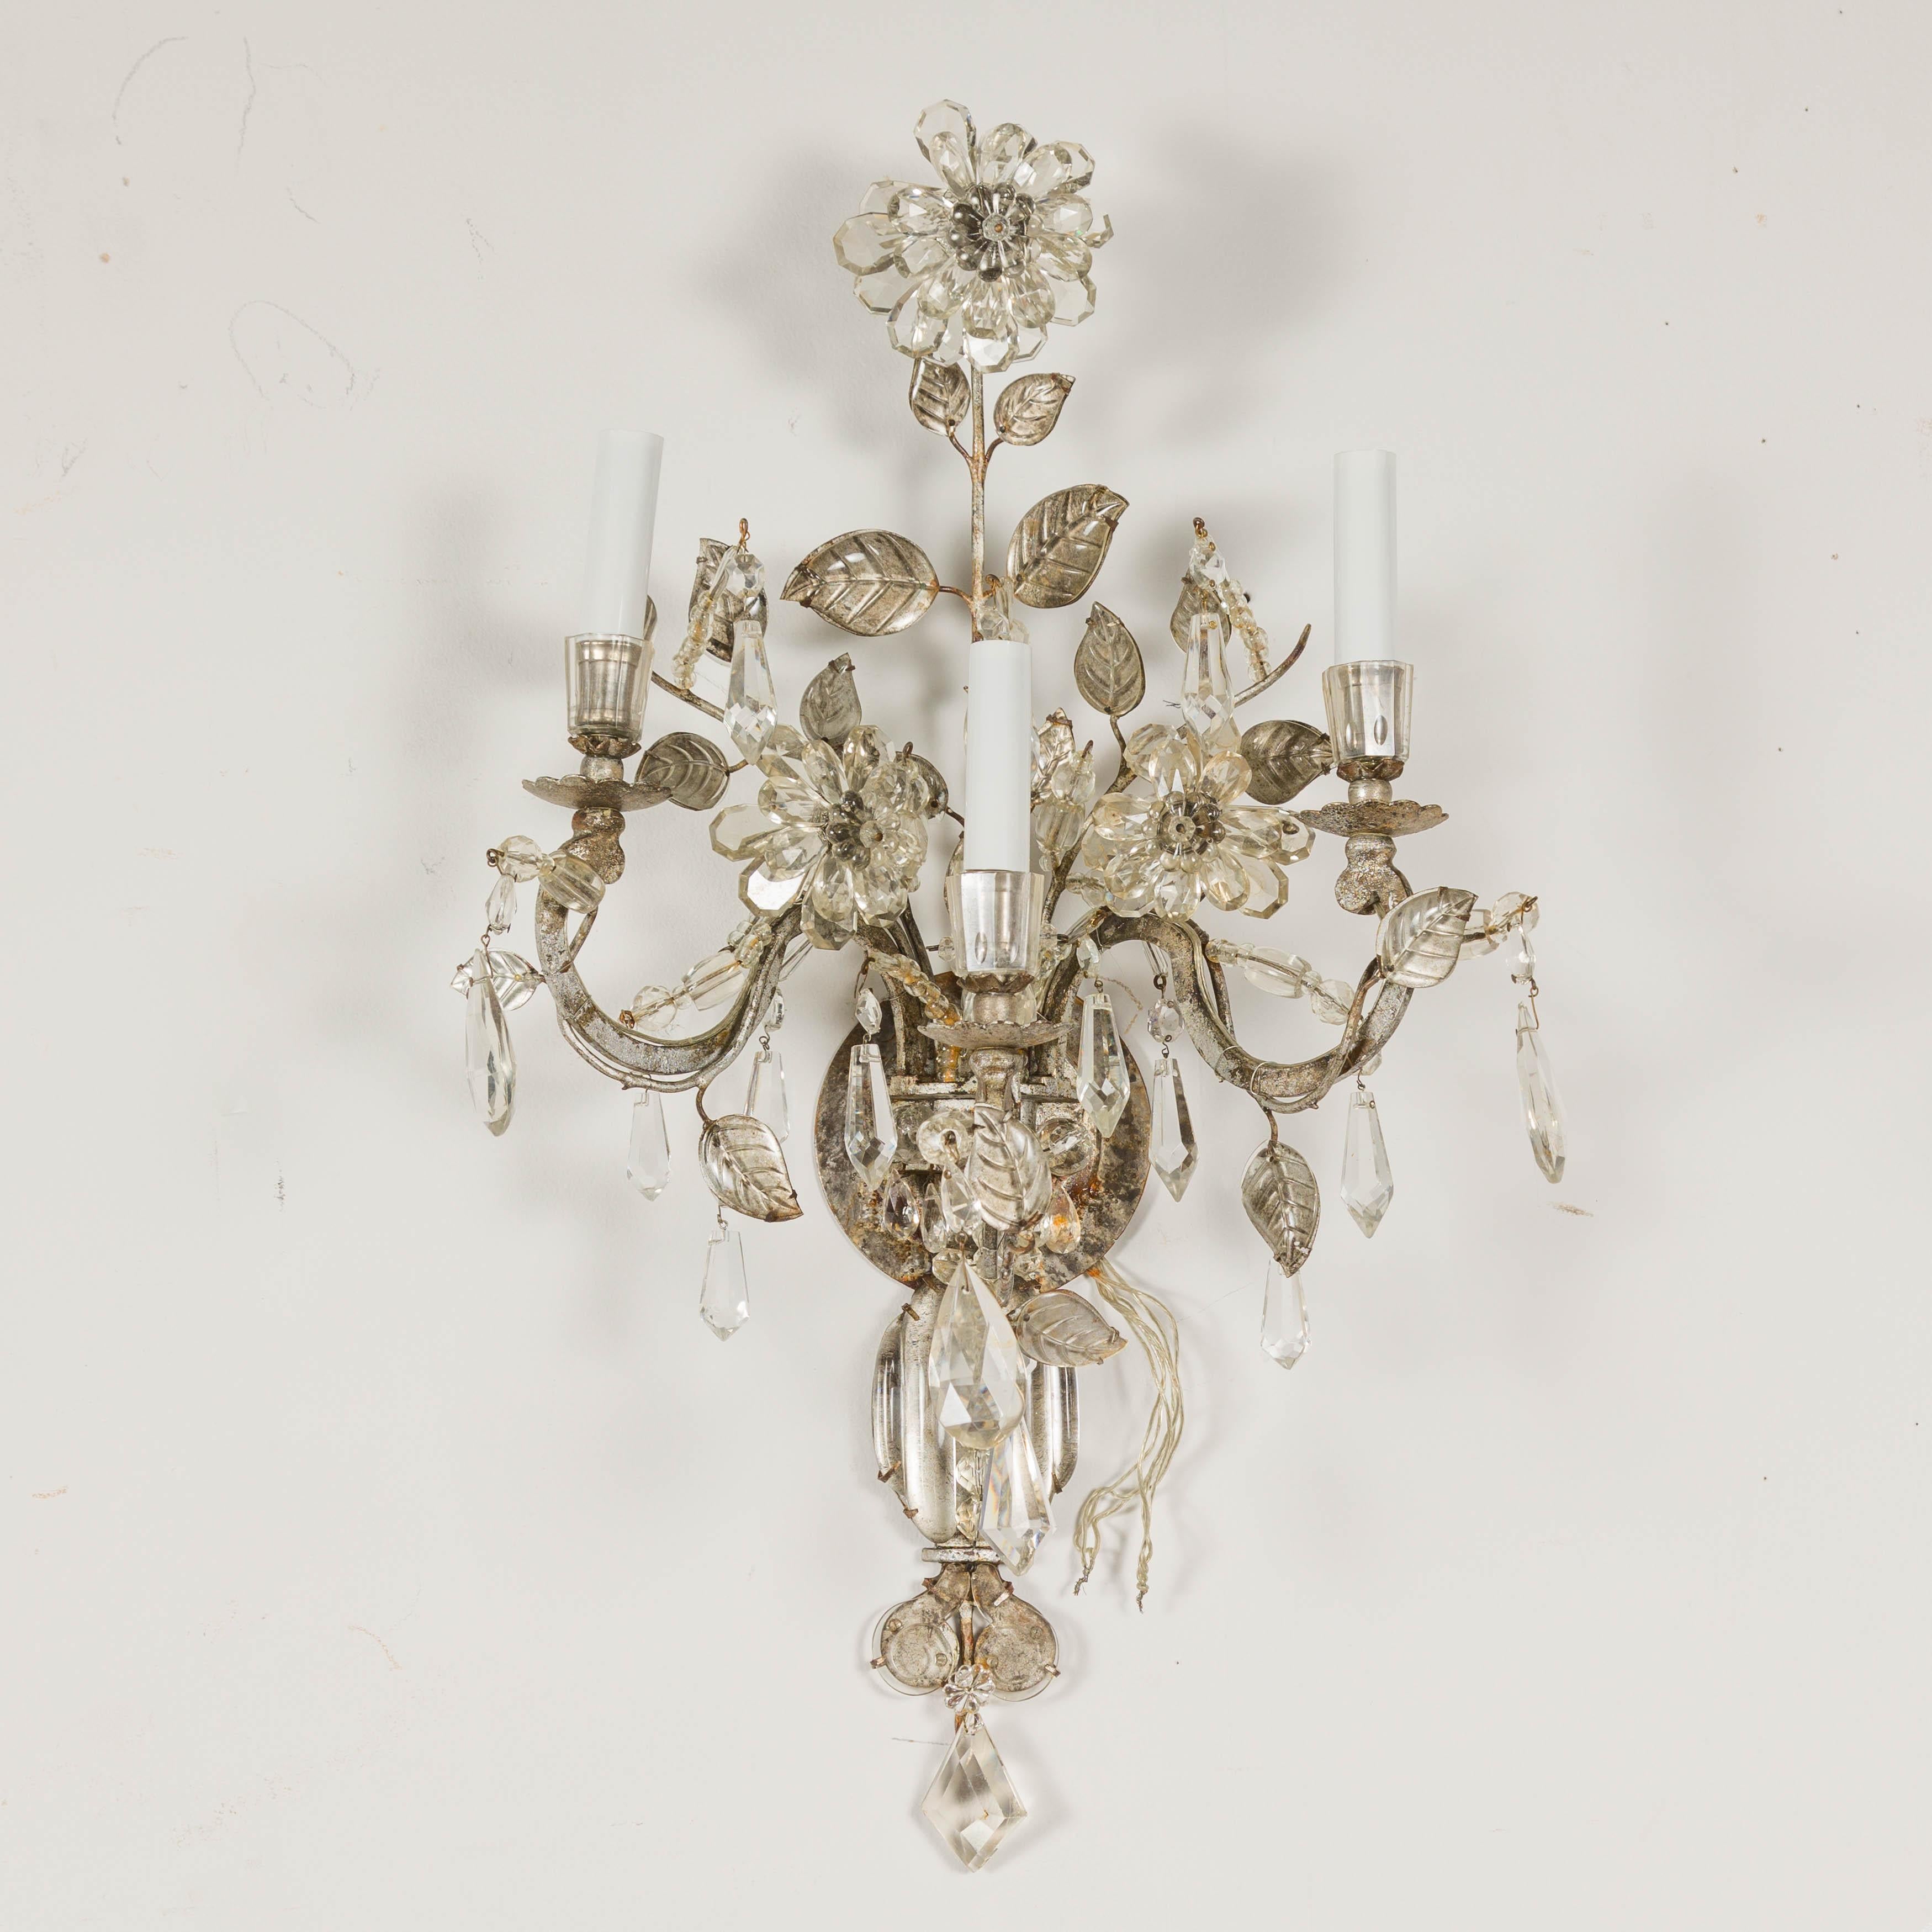 A pair of French Maison Baguès crystal sconces from circa 1940 with three arms each and floral motifs. Embodying the enduring elegance of French Maison Baguès design, this exquisite pair of crystal sconces from circa 1940 stands as a testament to